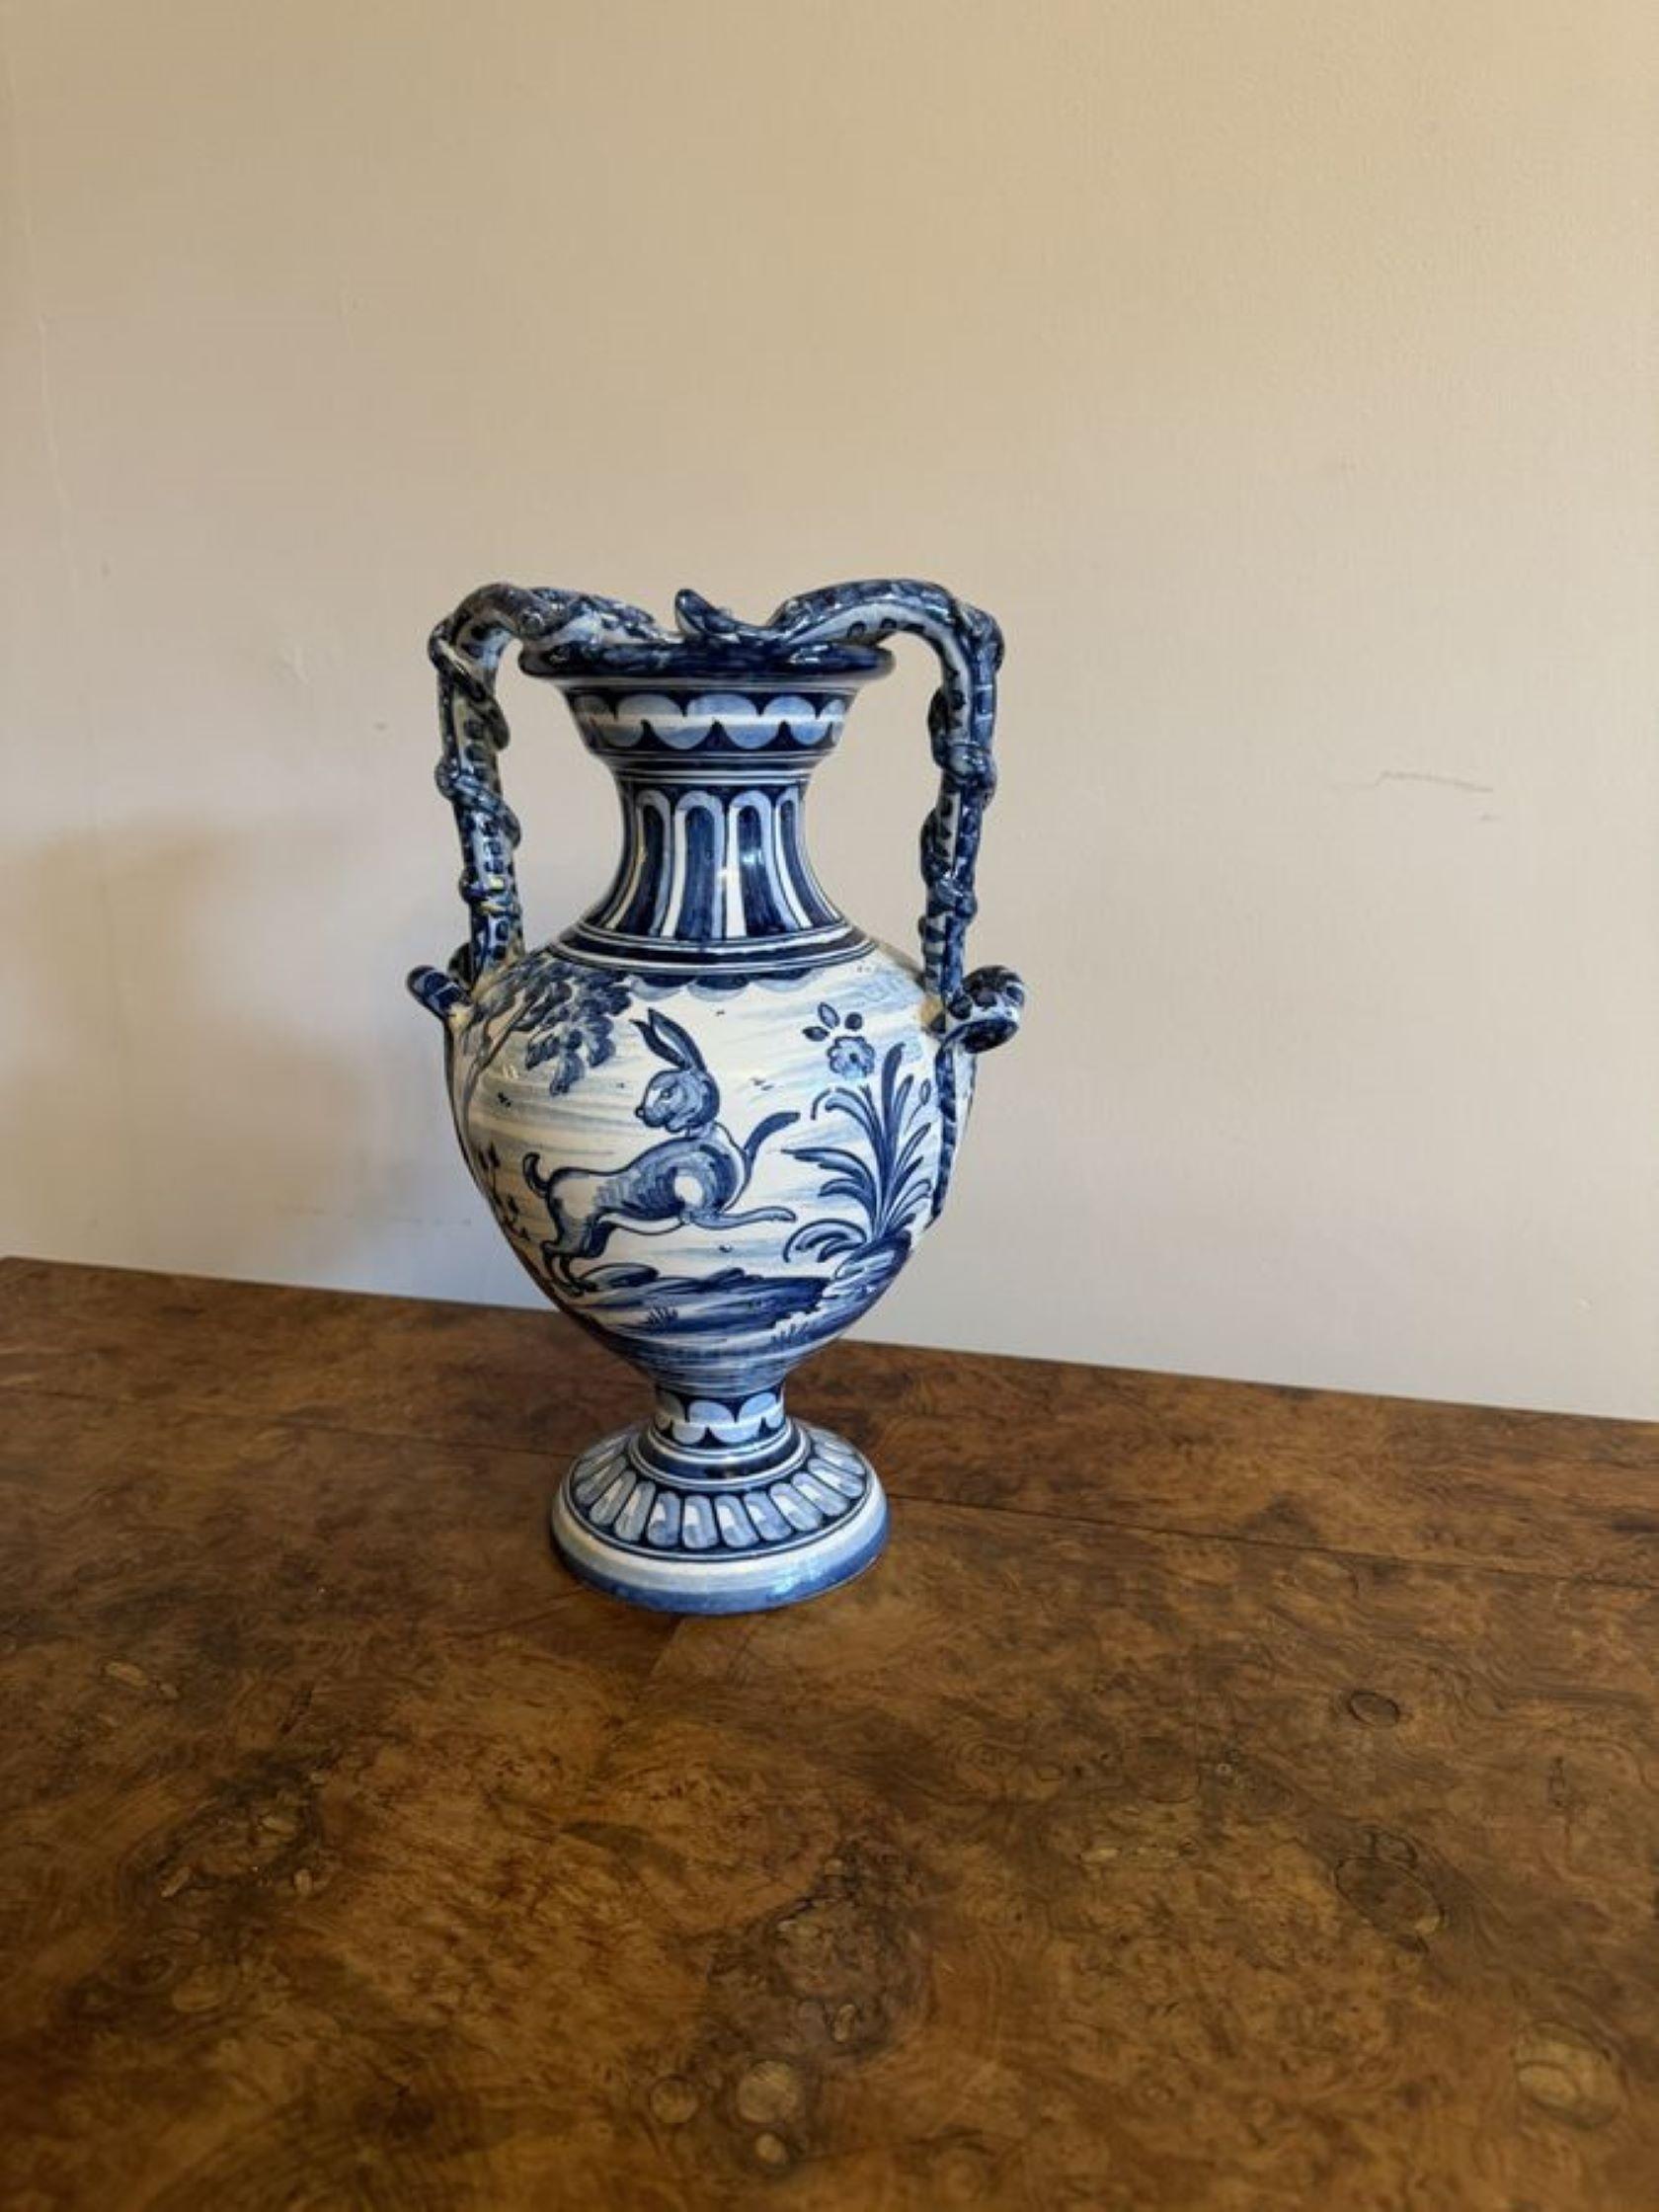 Beautiful antique Talavere blue and white vase having a beautiful antique blue and white vase with twin shaped handles to the sides with vine detailing, a fluted shaped neck above a bulbous shaped body, stunning decoration with a bird on one side